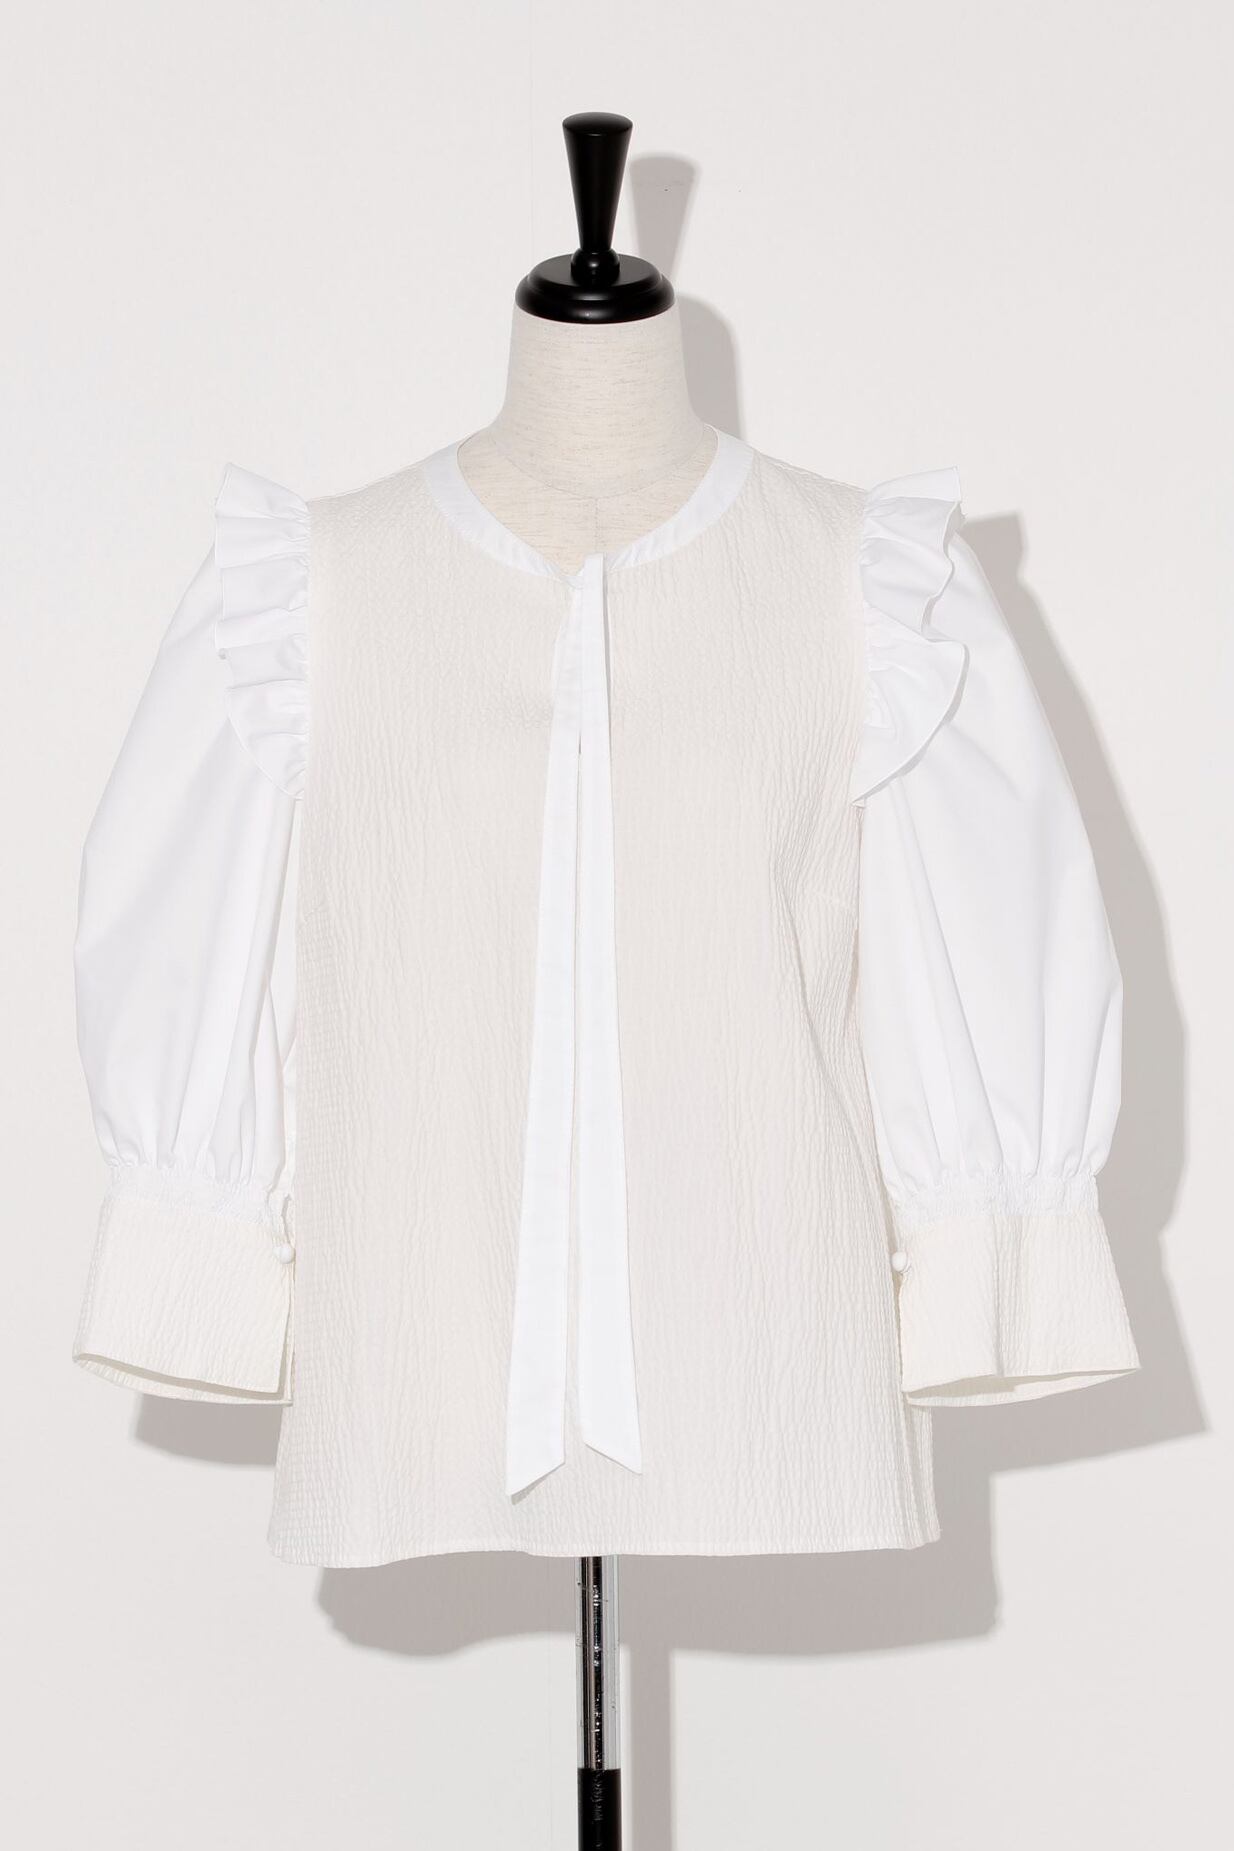 Bumpy Frill Shirt Ⅱ　WHITE | Arobe OFFICIAL ONLINE STORE